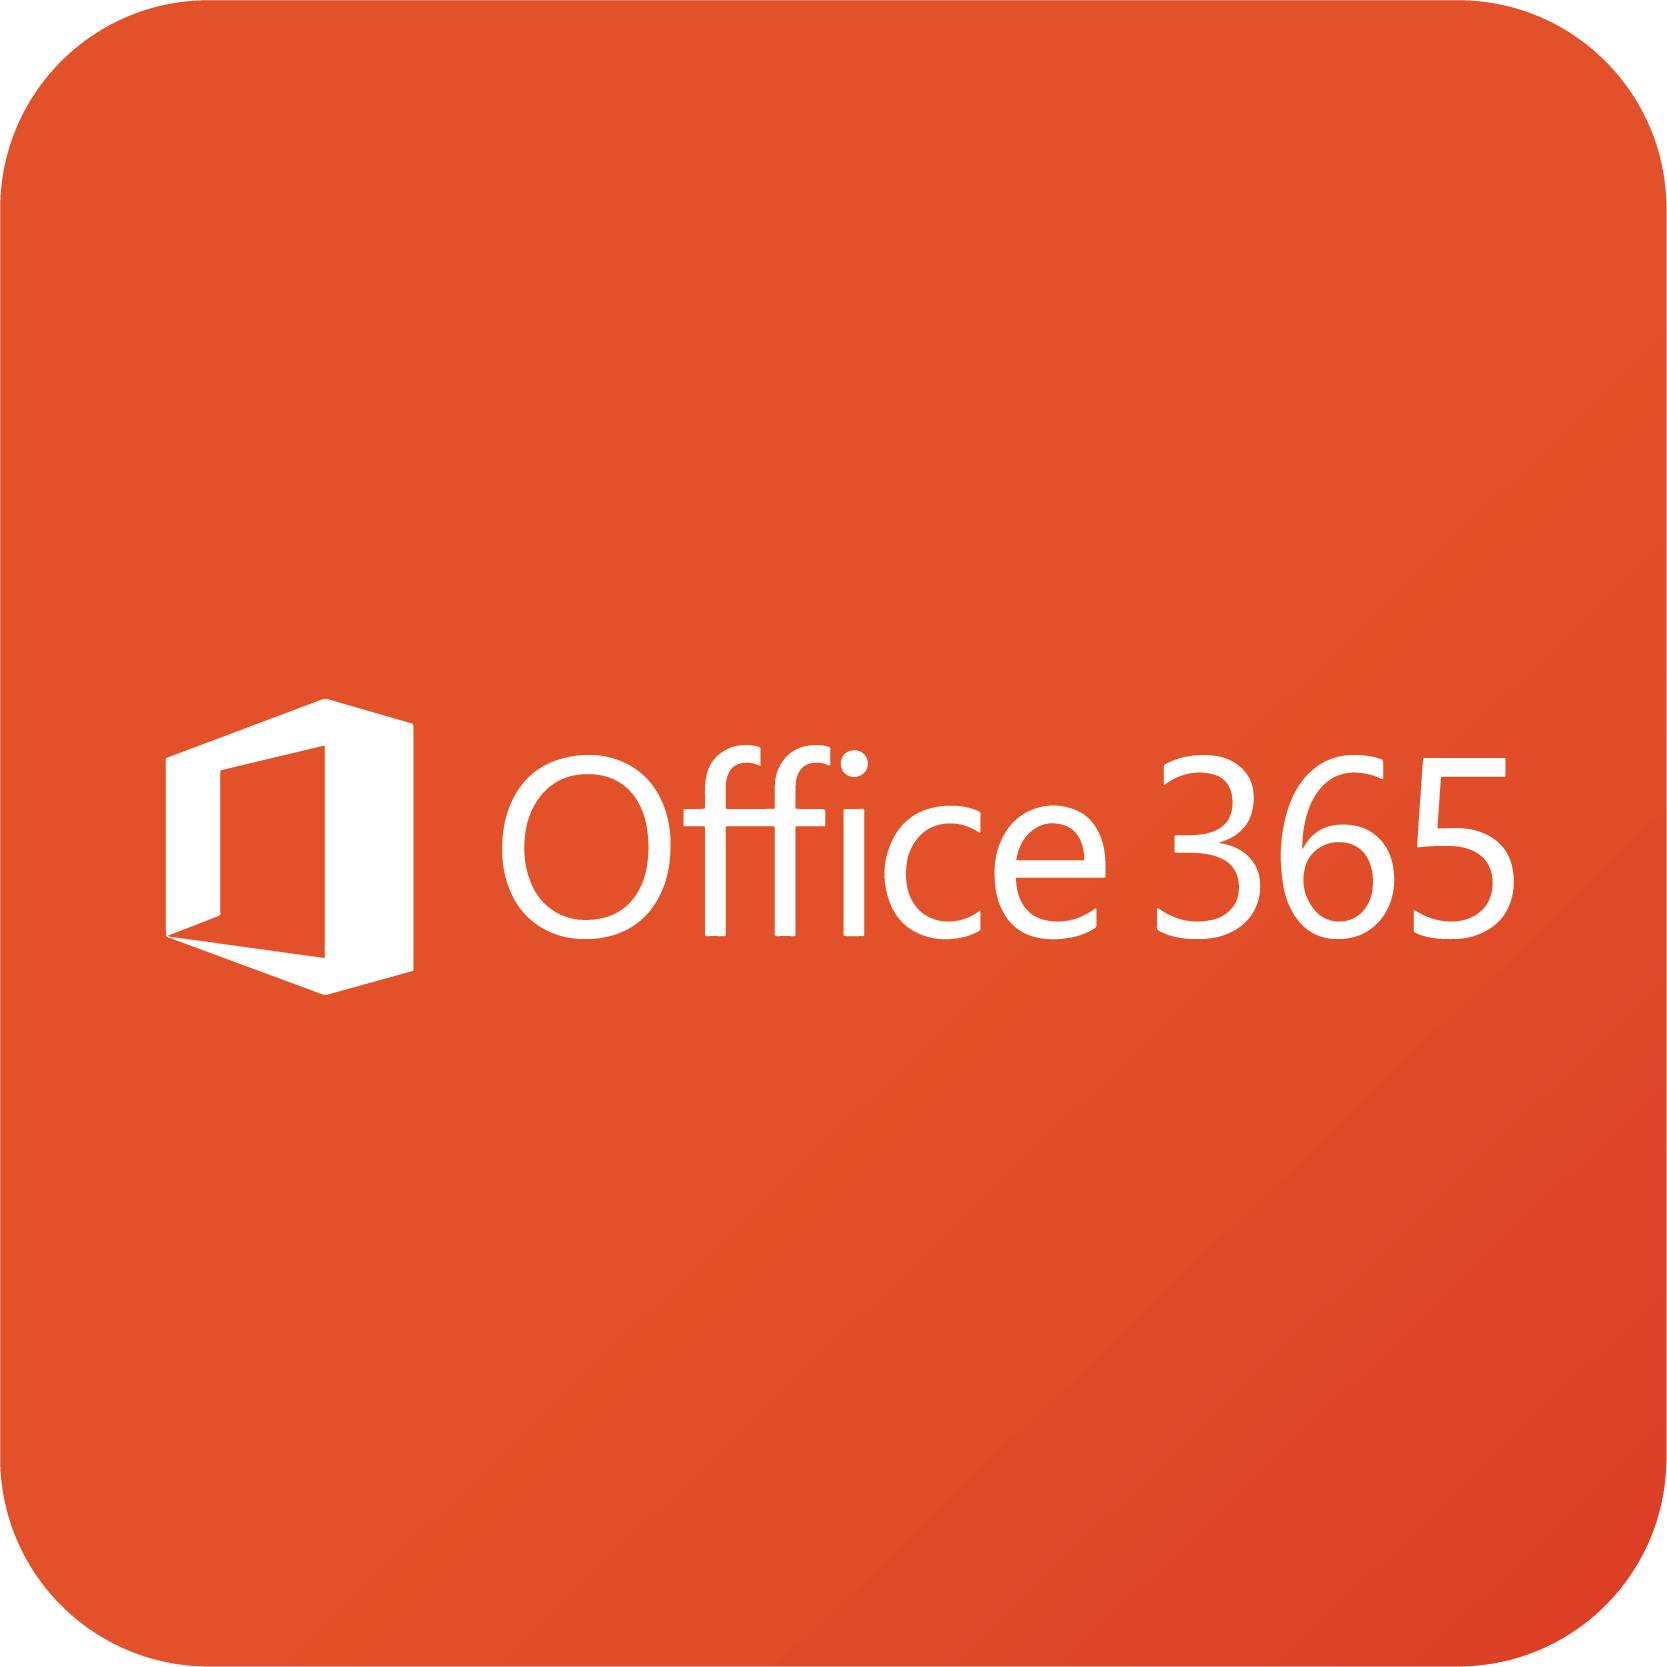 Email - Office 365